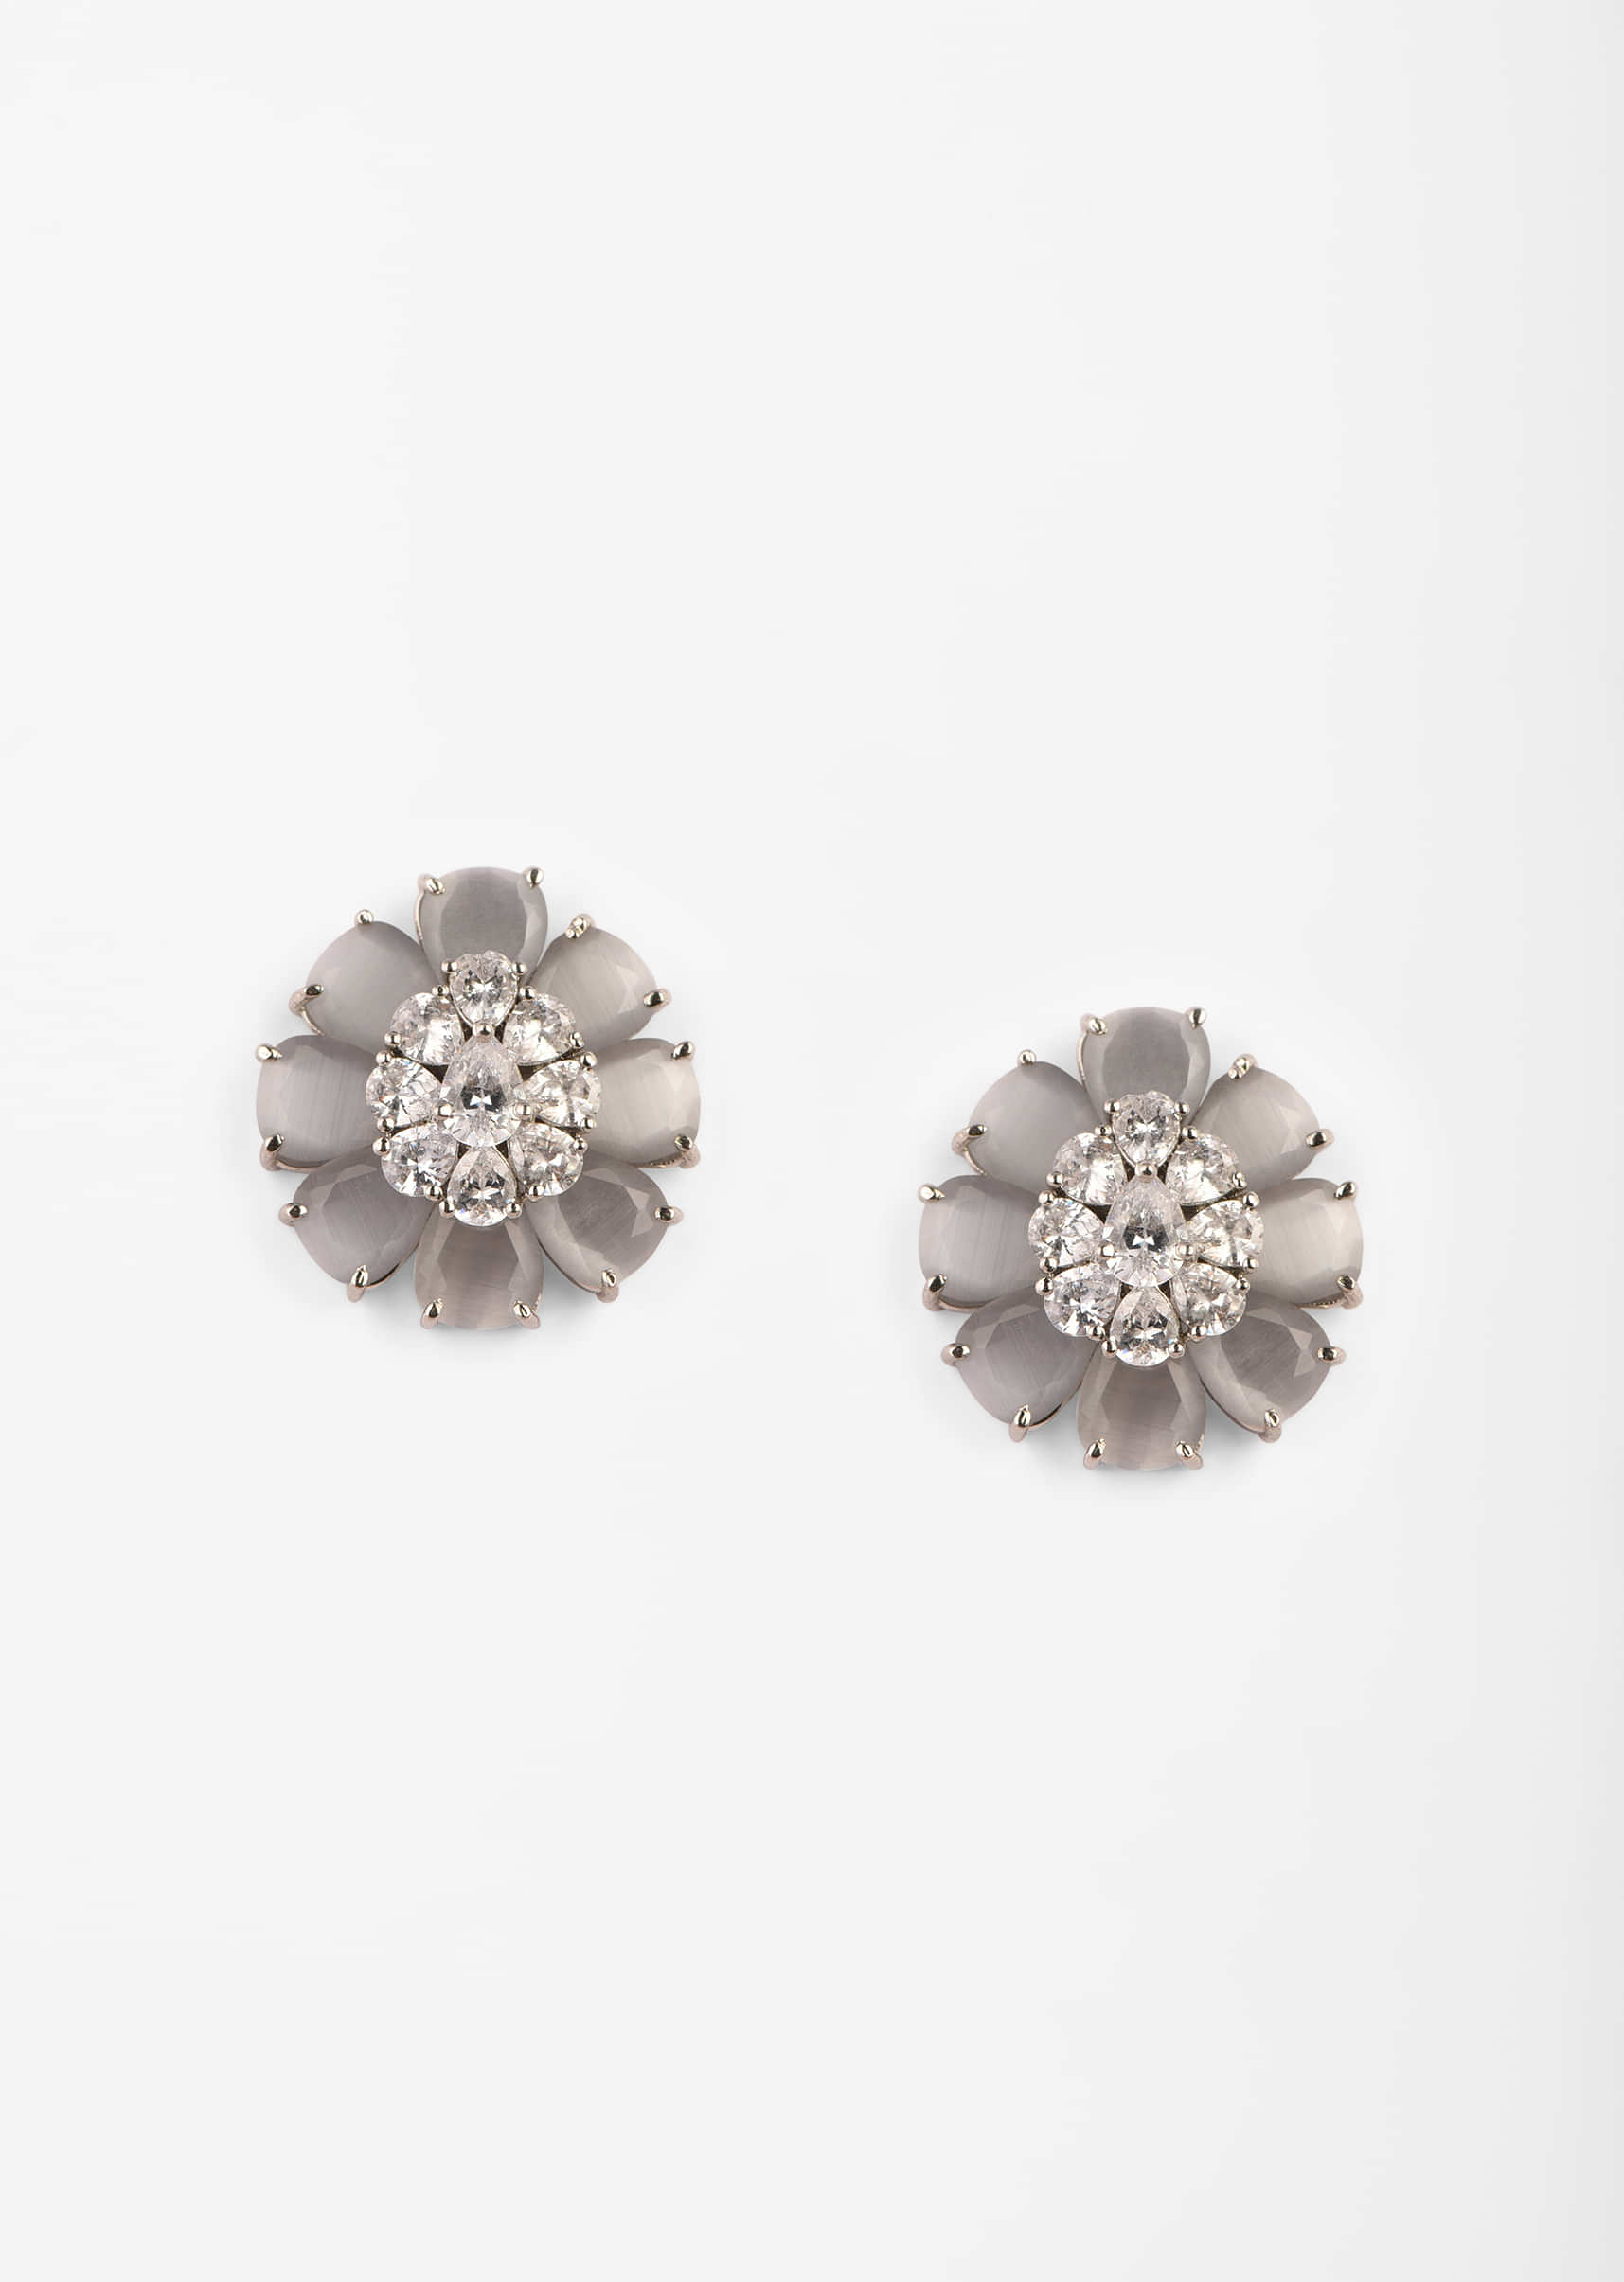 Grey Stone Studded Floral Stud Earrings With Swarovski In The Centre 